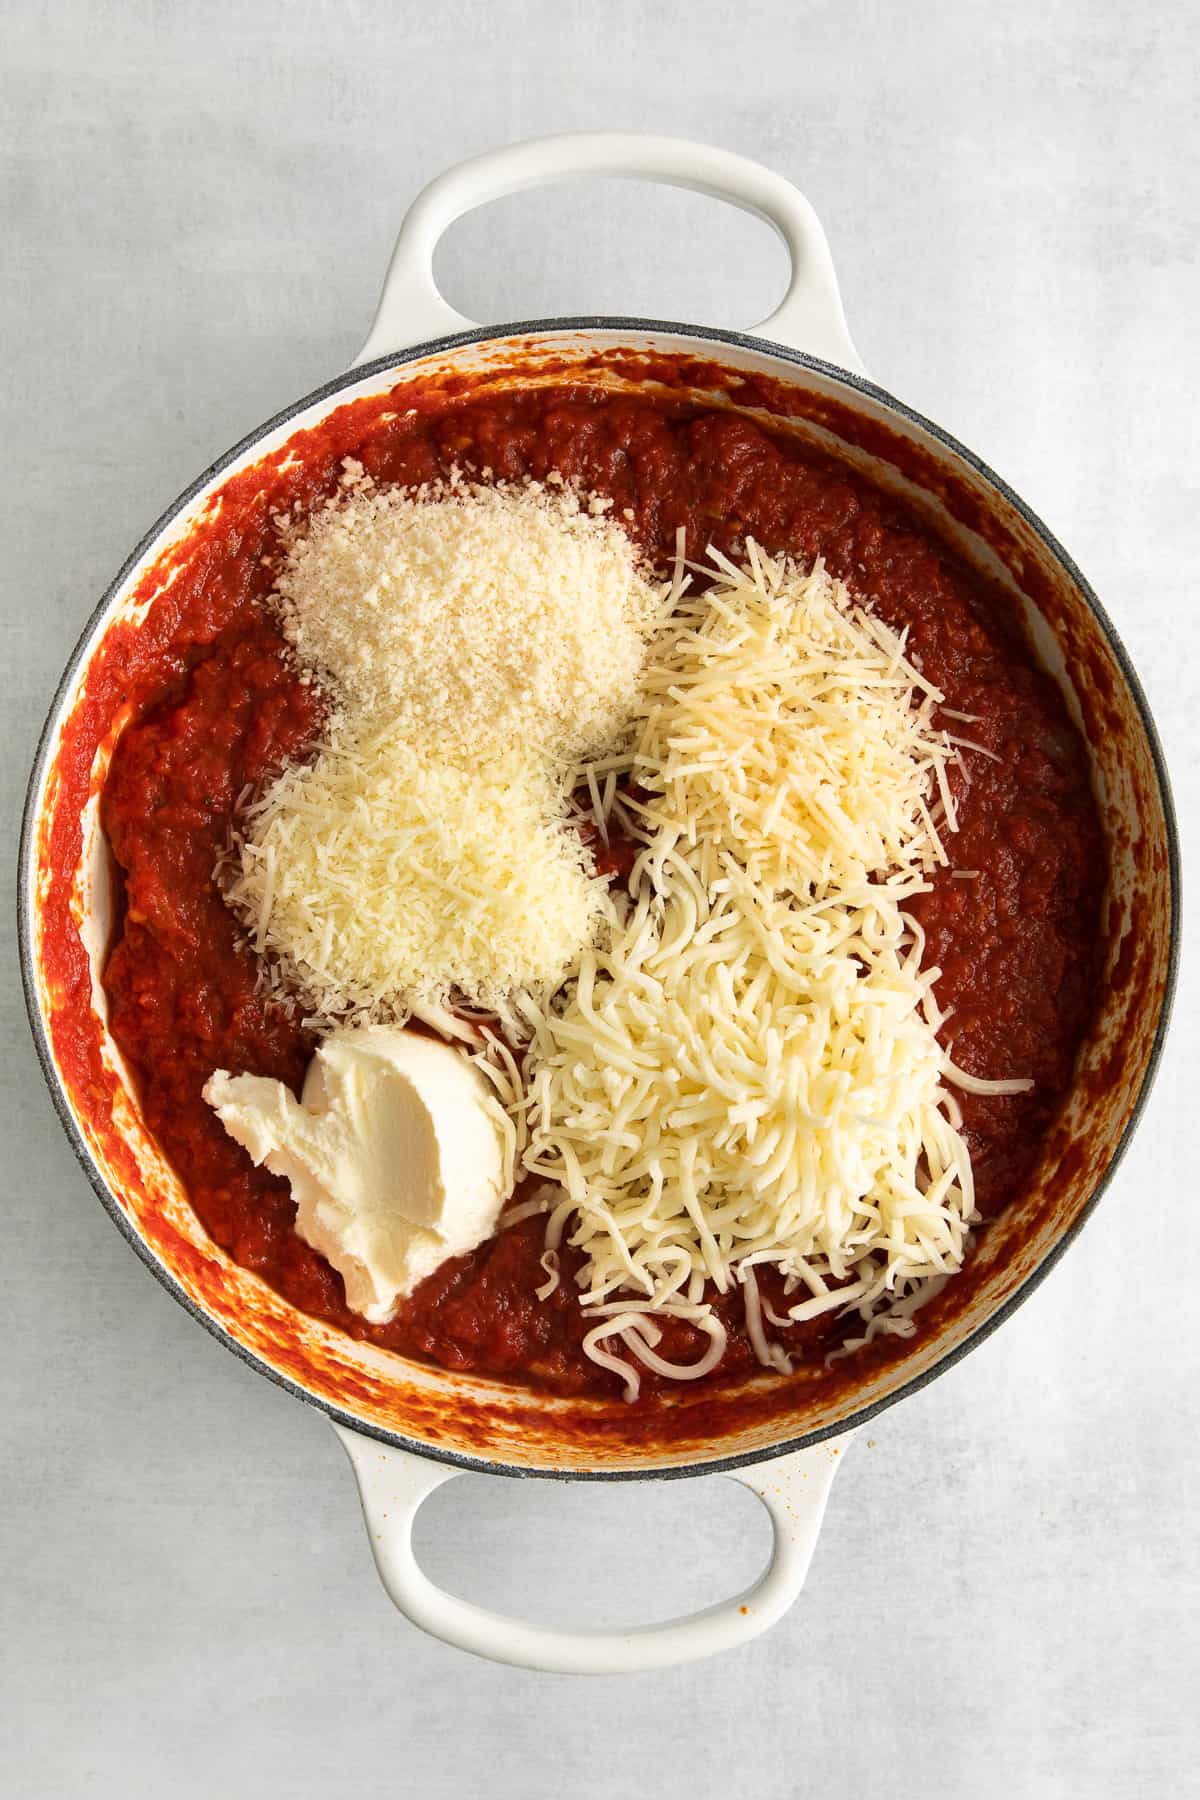 Marinara sauce with 5 varieties of cheese on top of it.